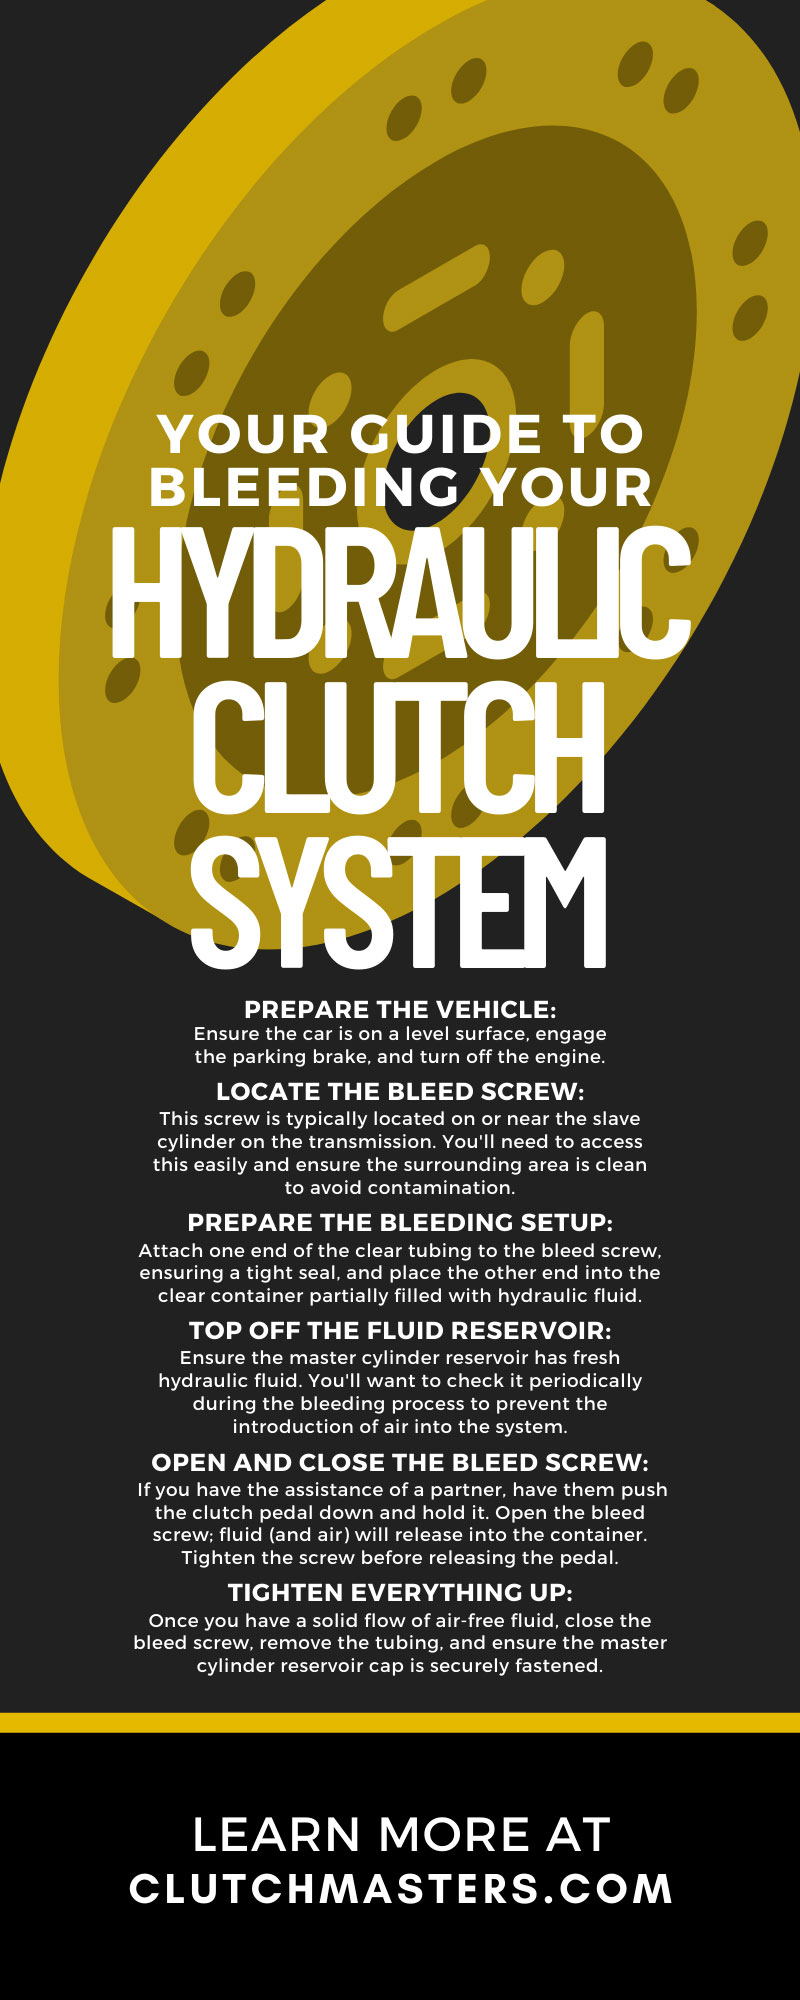 Your Guide to Bleeding Your Hydraulic Clutch System